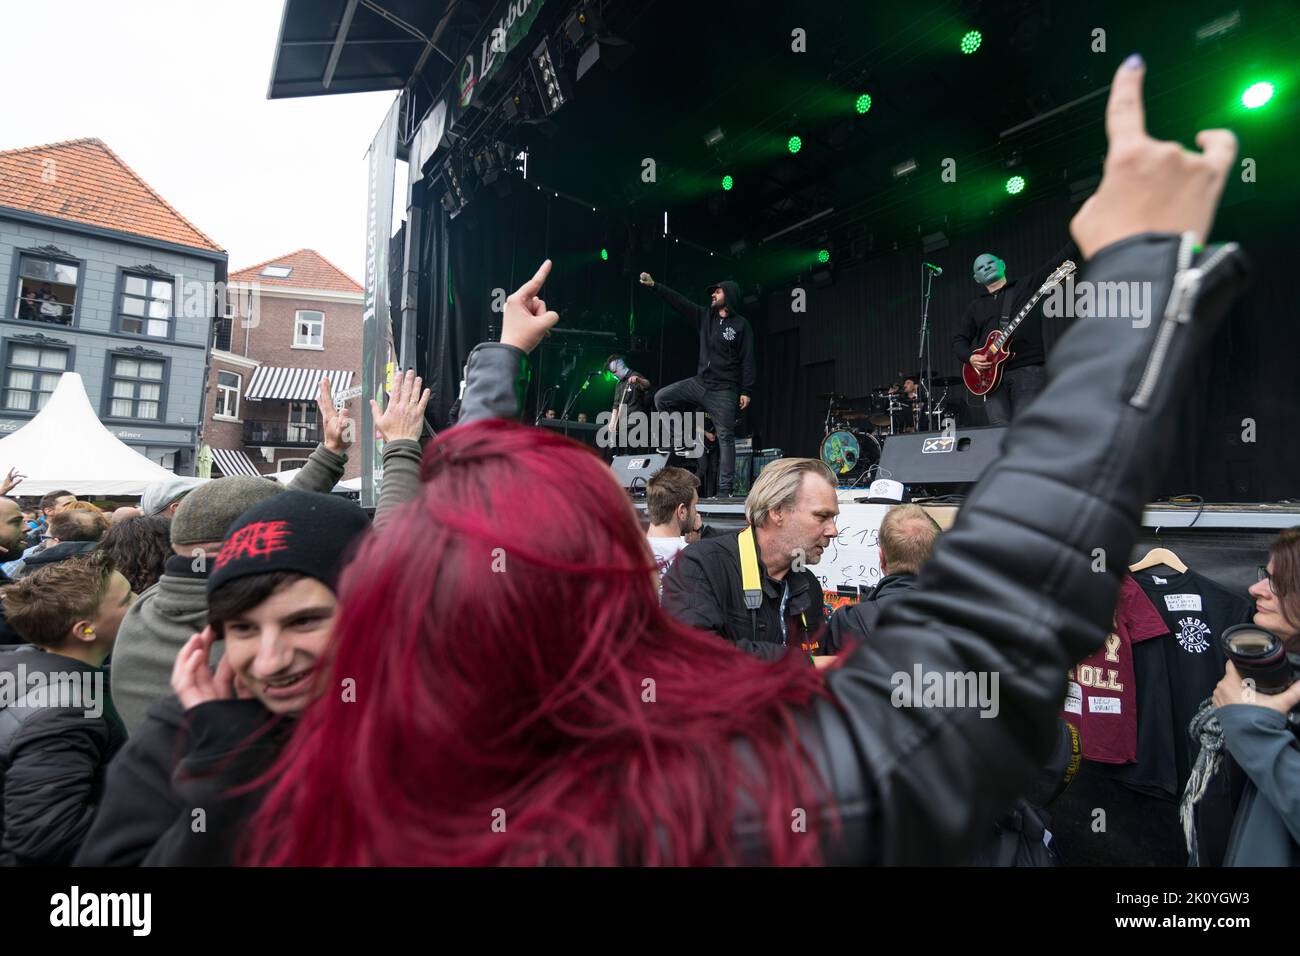 Young people dancing in front of the stage at live performance of a rock band, Netherlands Stock Photo